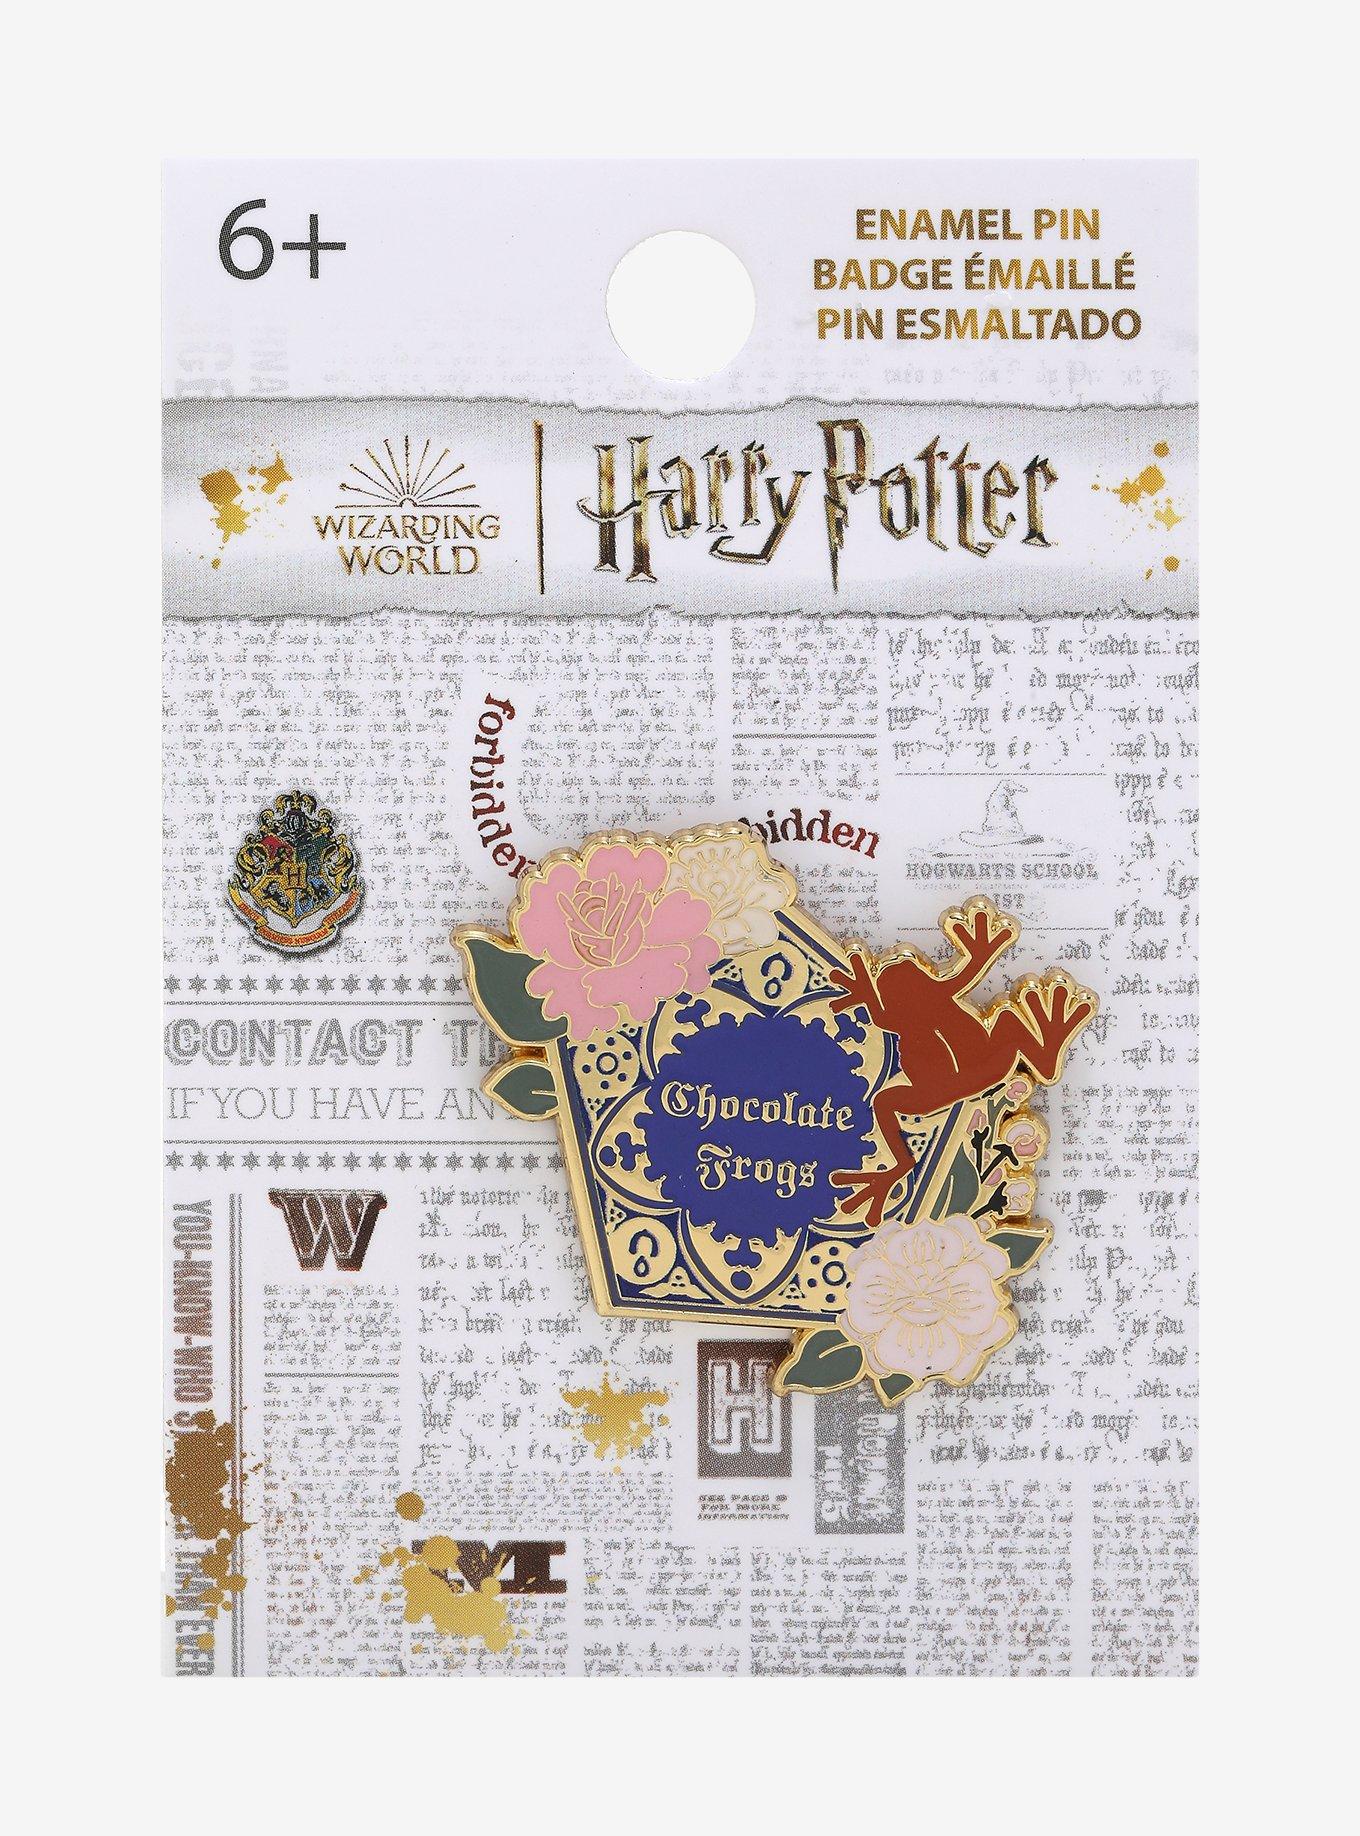 Loungefly Harry Potter Chocolate Frog Mini Backpack